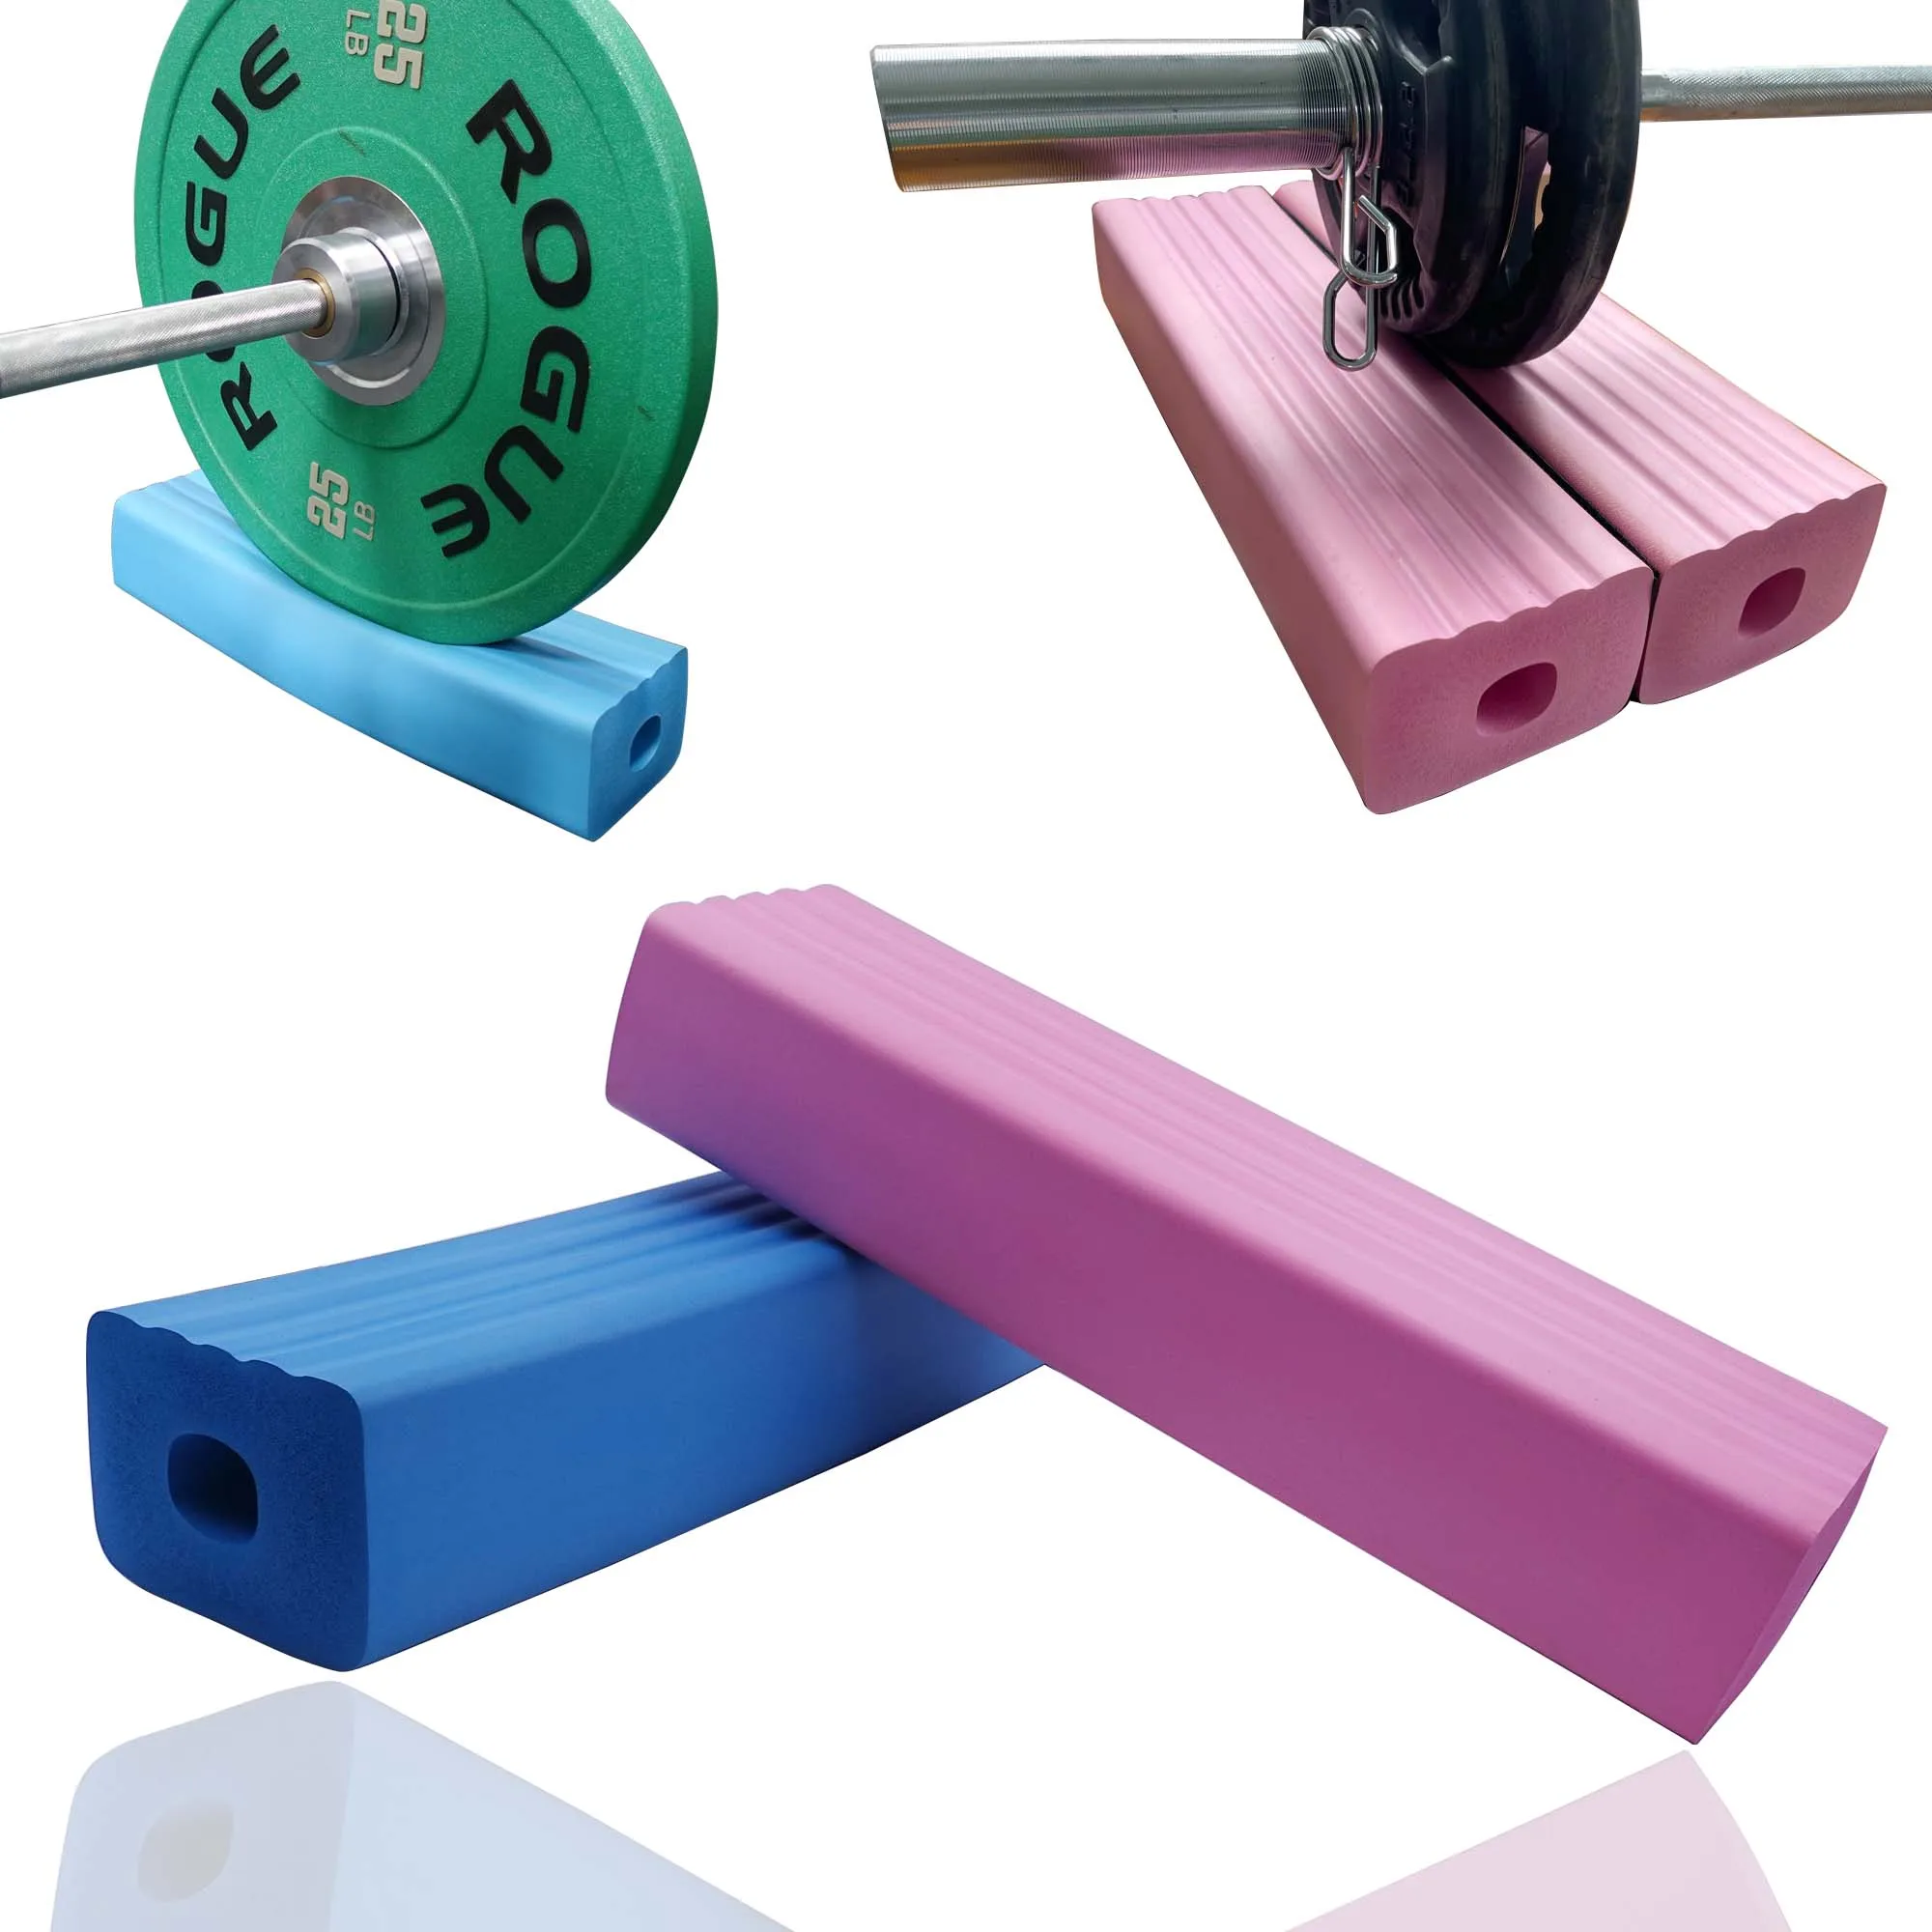 Weightlifting Barbell Plate Cushion Pad Protector for Deadlift Balance Pad Support Pad Fitness Equipment High Density